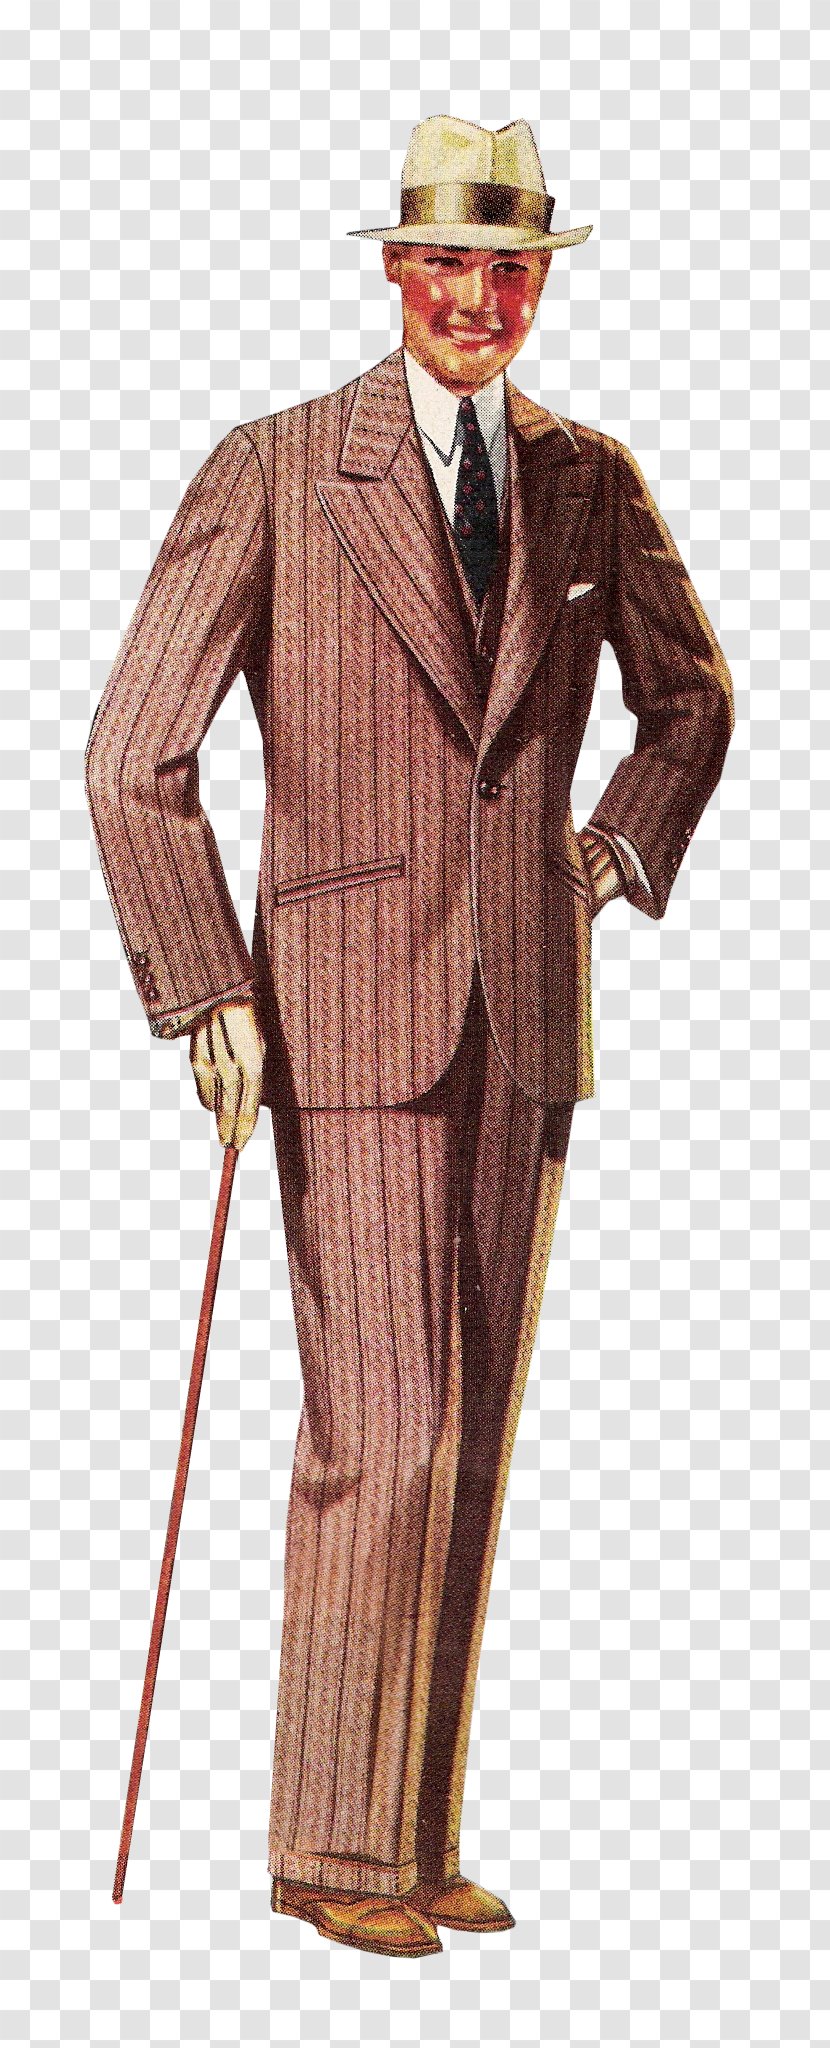 1920s 1940s 1930s Suit Fashion - Clothing - Gatsby Transparent PNG